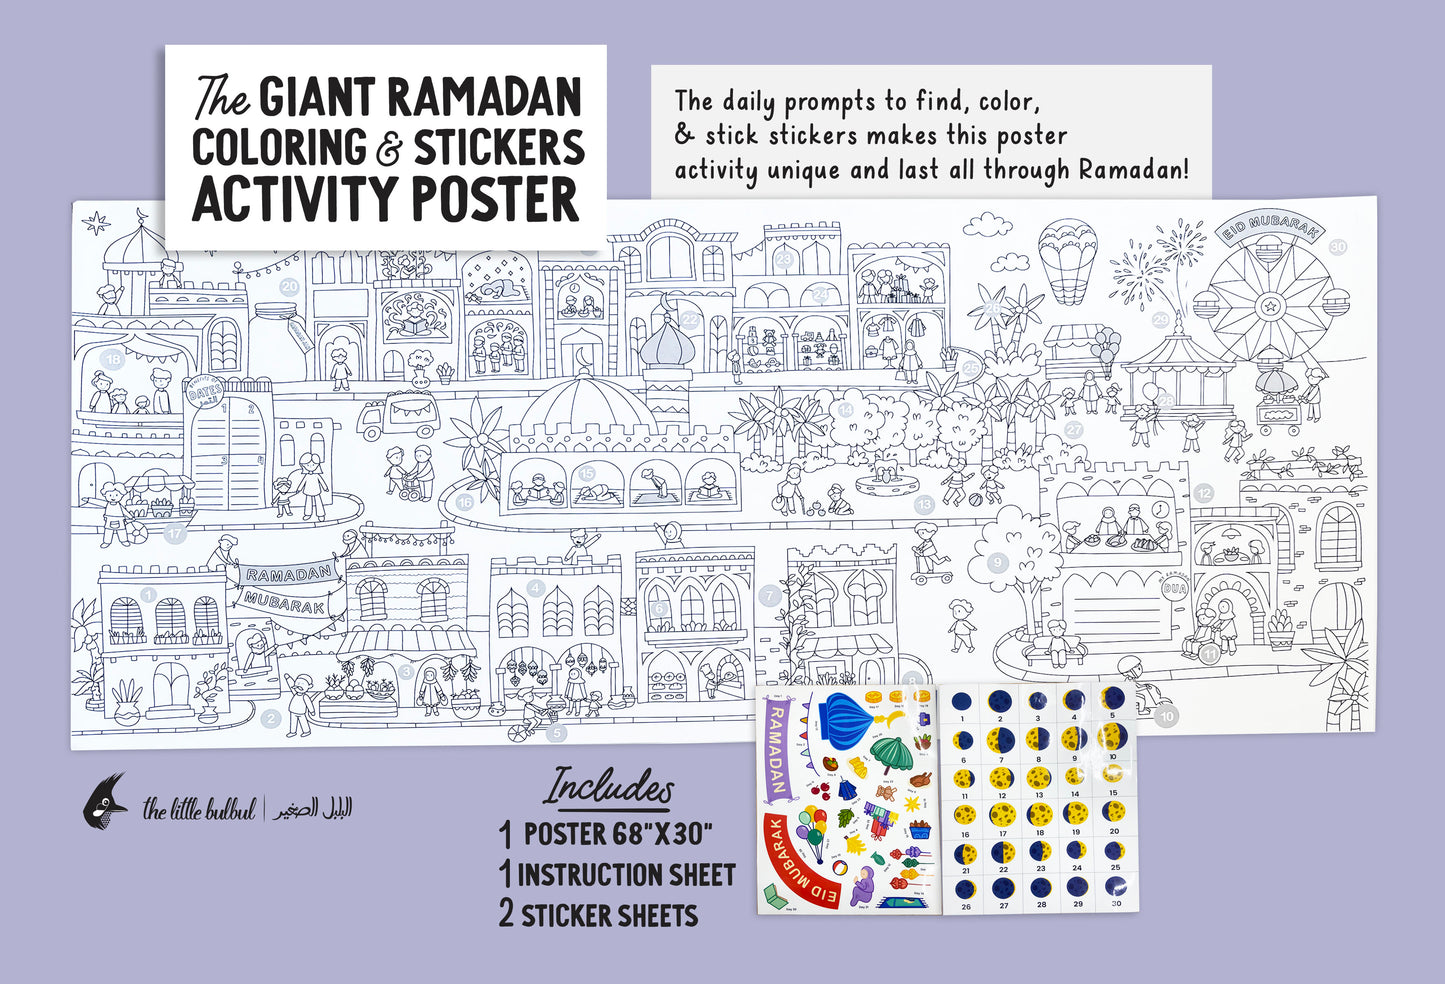 The Giant Ramadan Coloring & Stickers Activity Poster